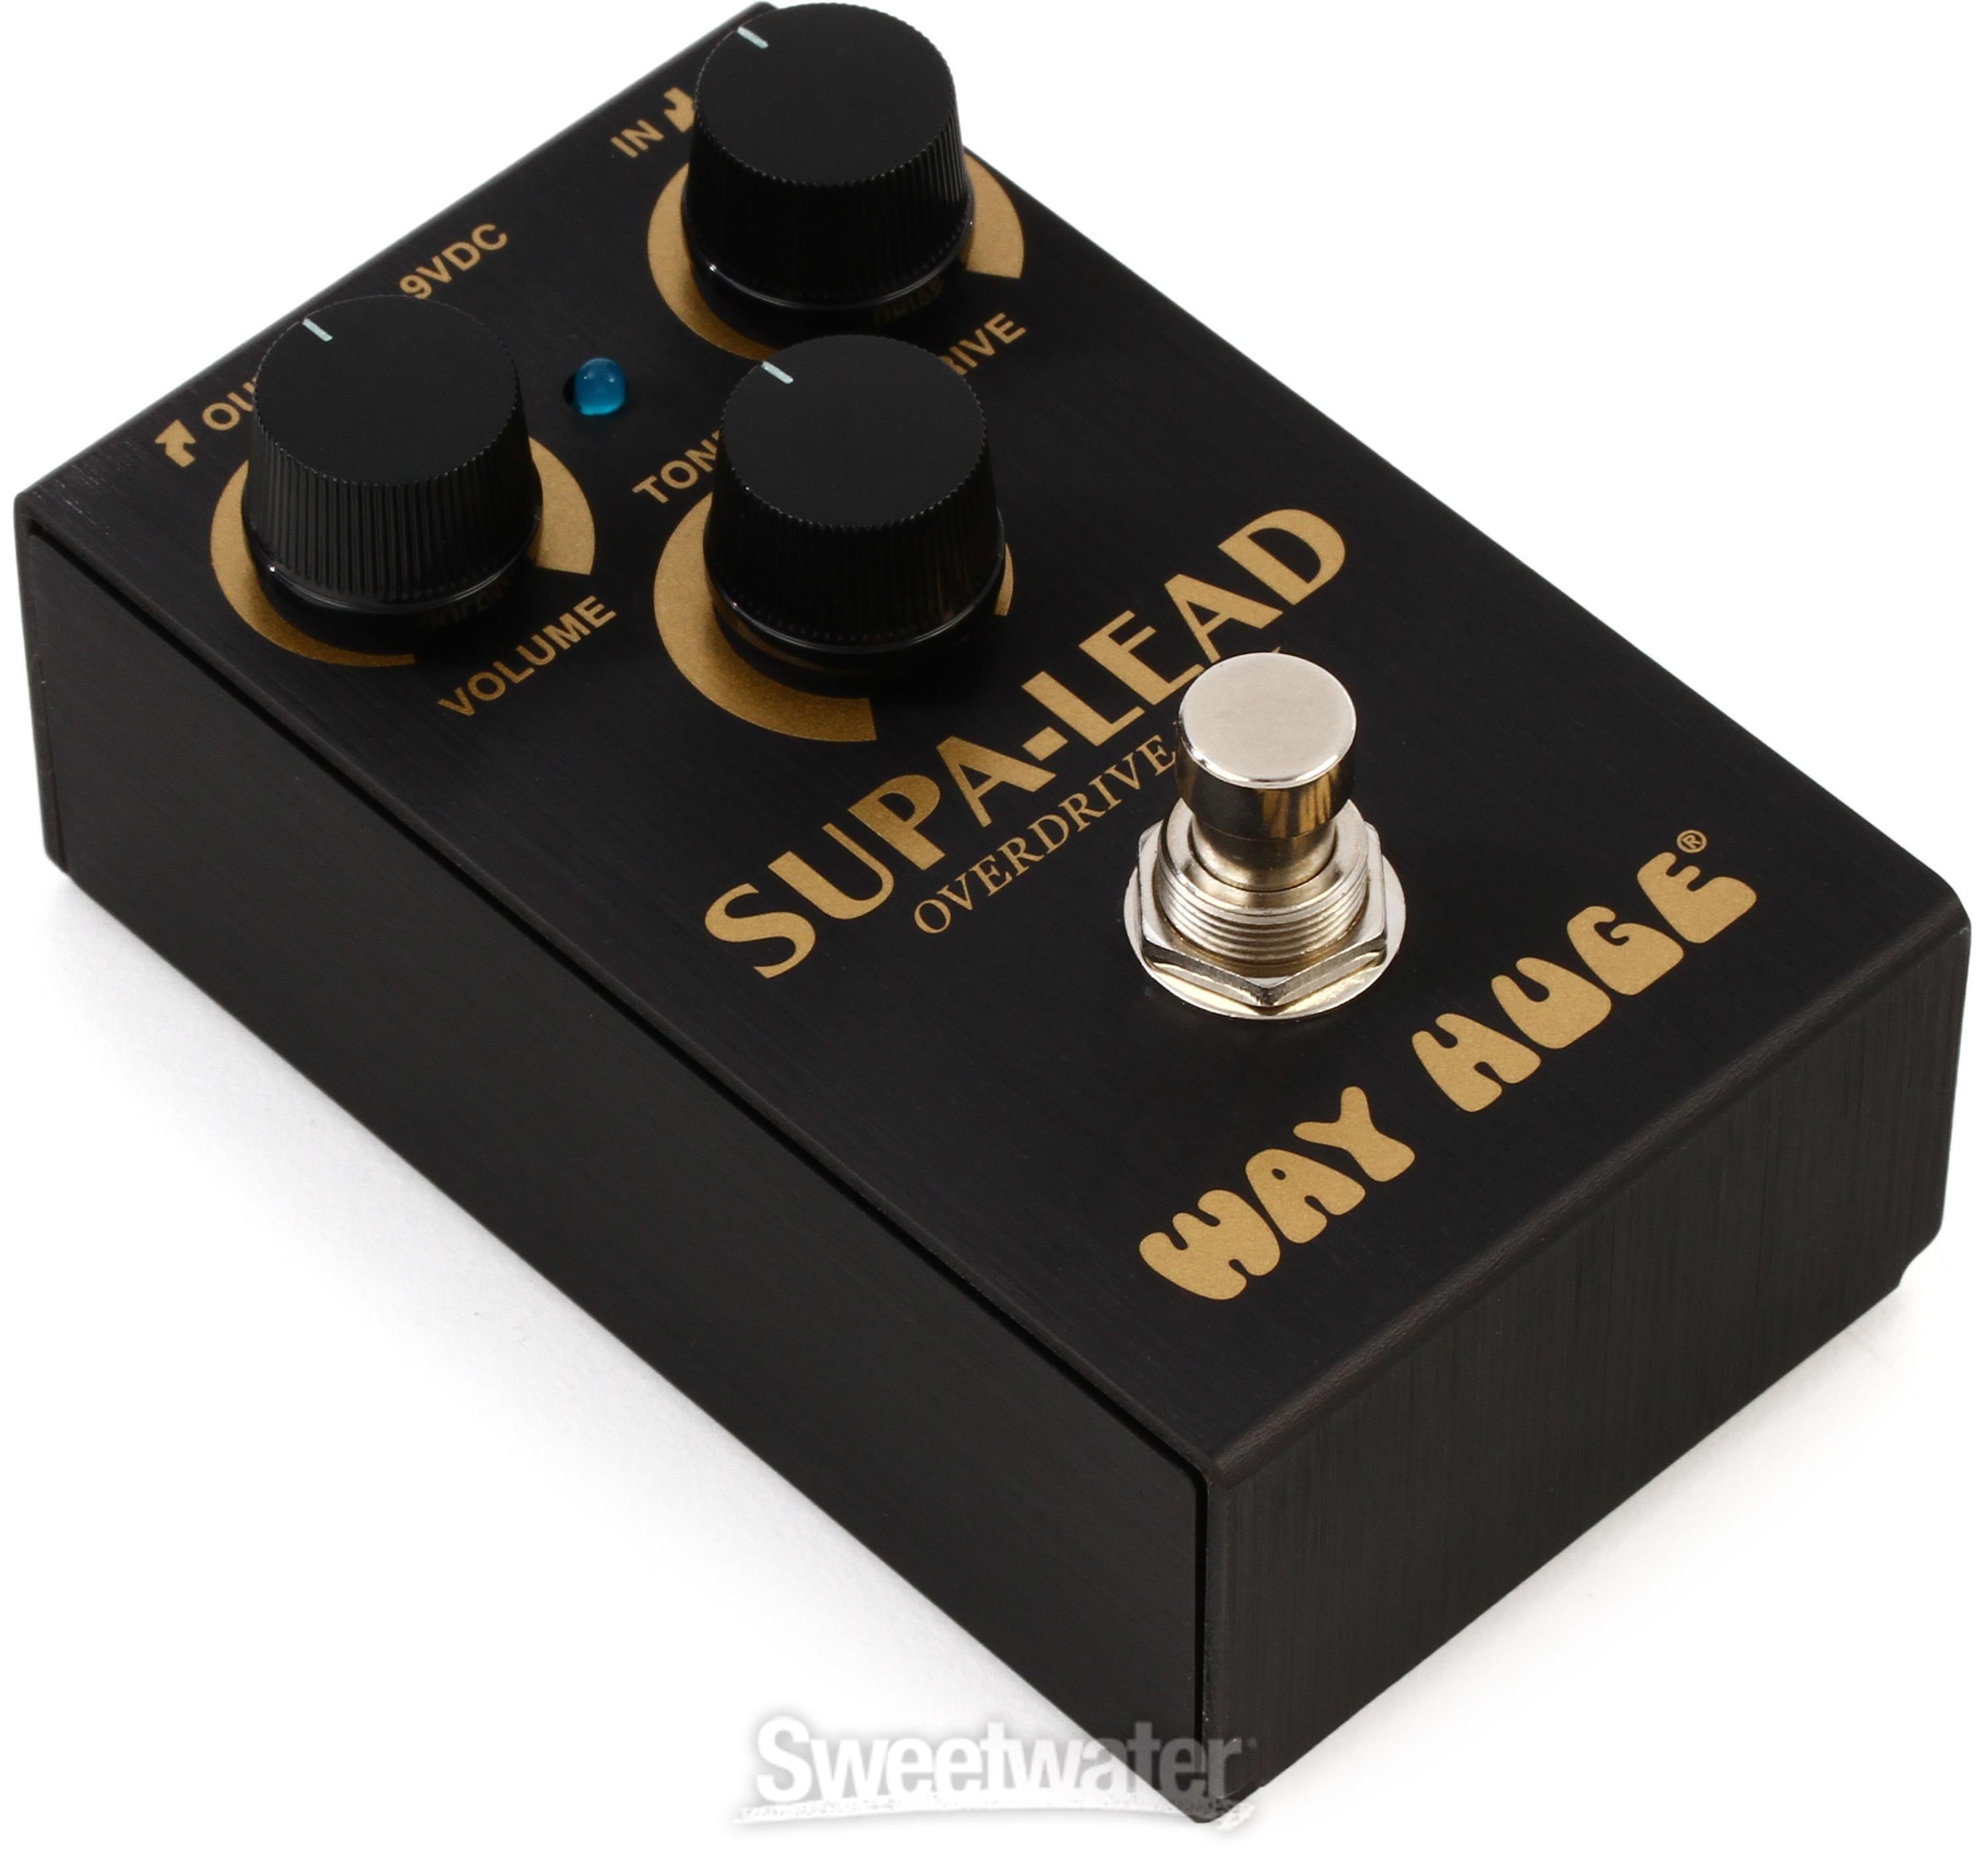 Way Huge Smalls Supa Lead Overdrive Pedal Reviews | Sweetwater